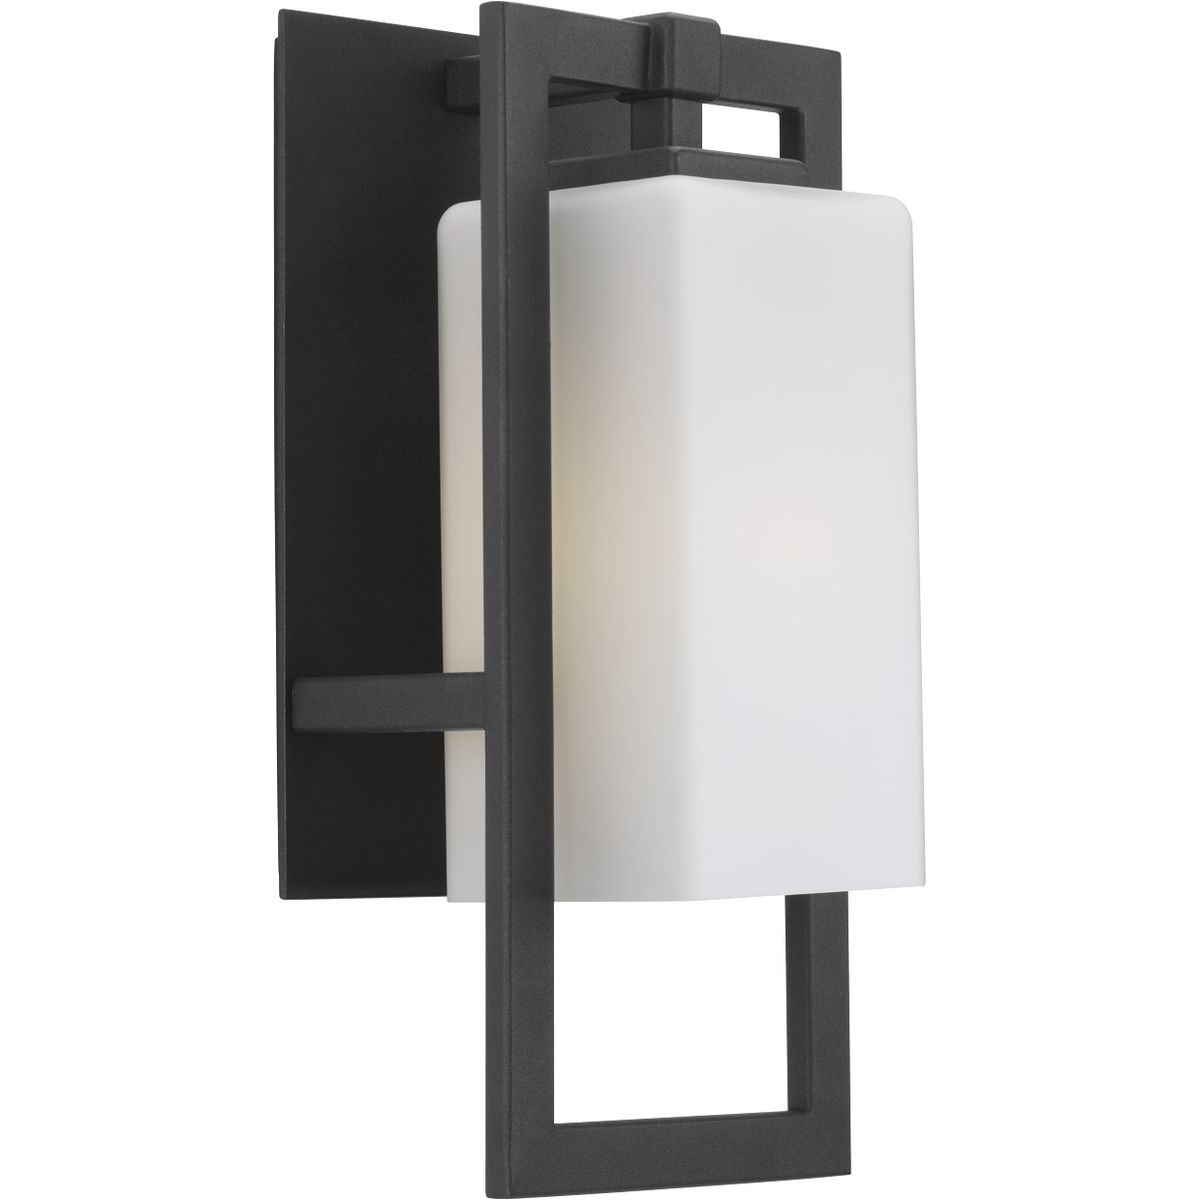 P5948-31 1-100W MED WALL SCONCE